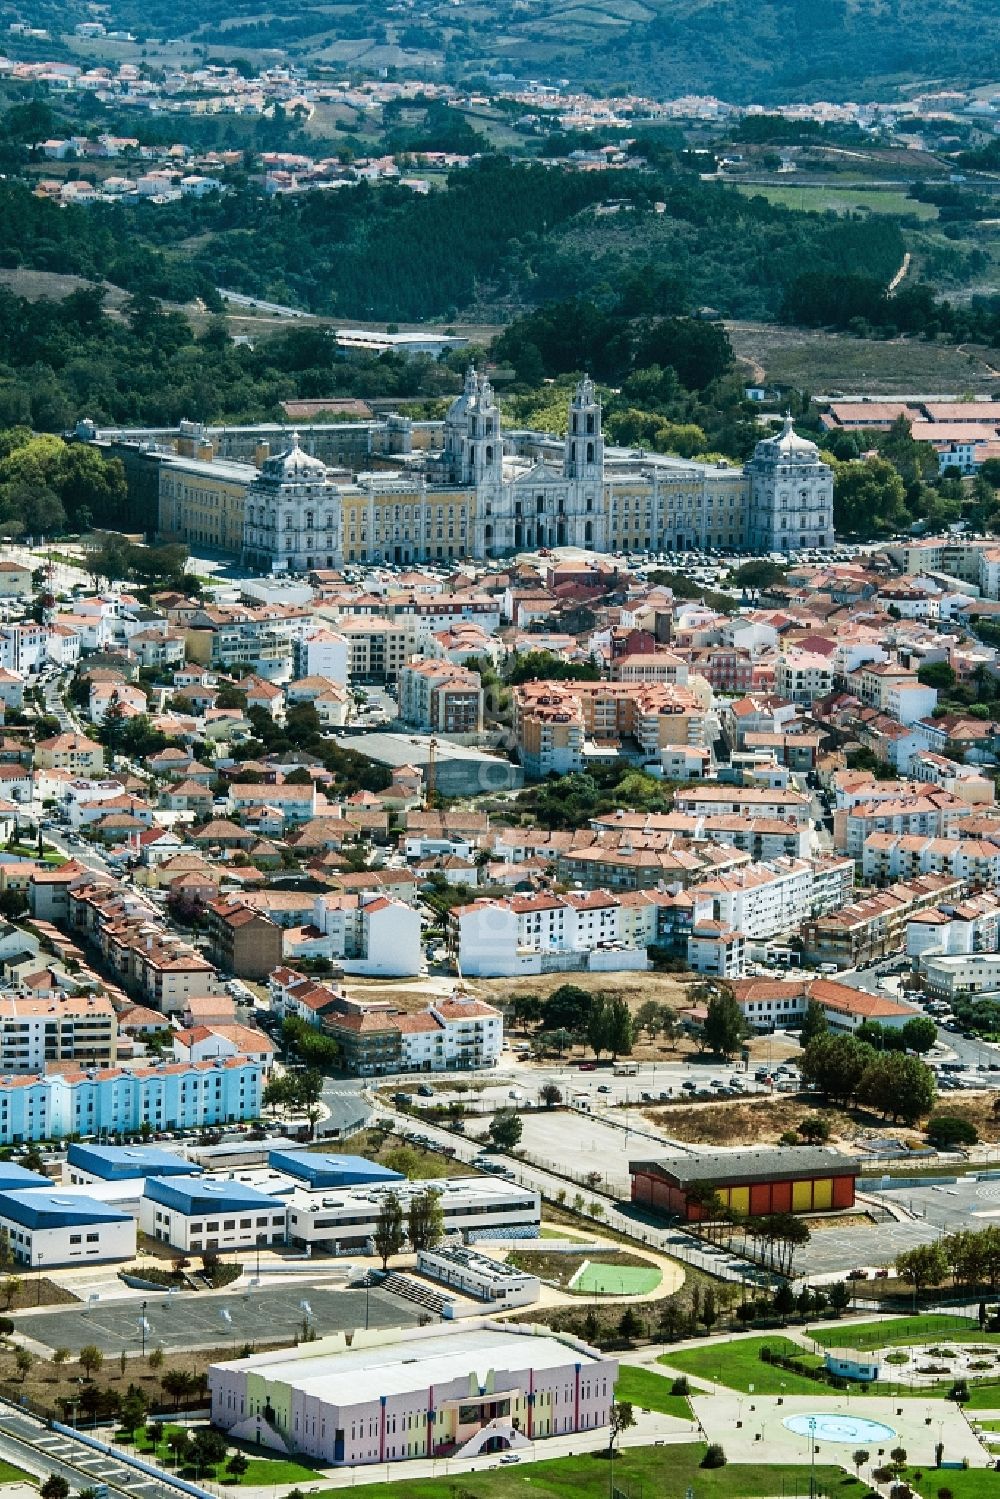 Mafra from the bird's eye view: City view of the city area of in Mafra in Lisbon, Portugal